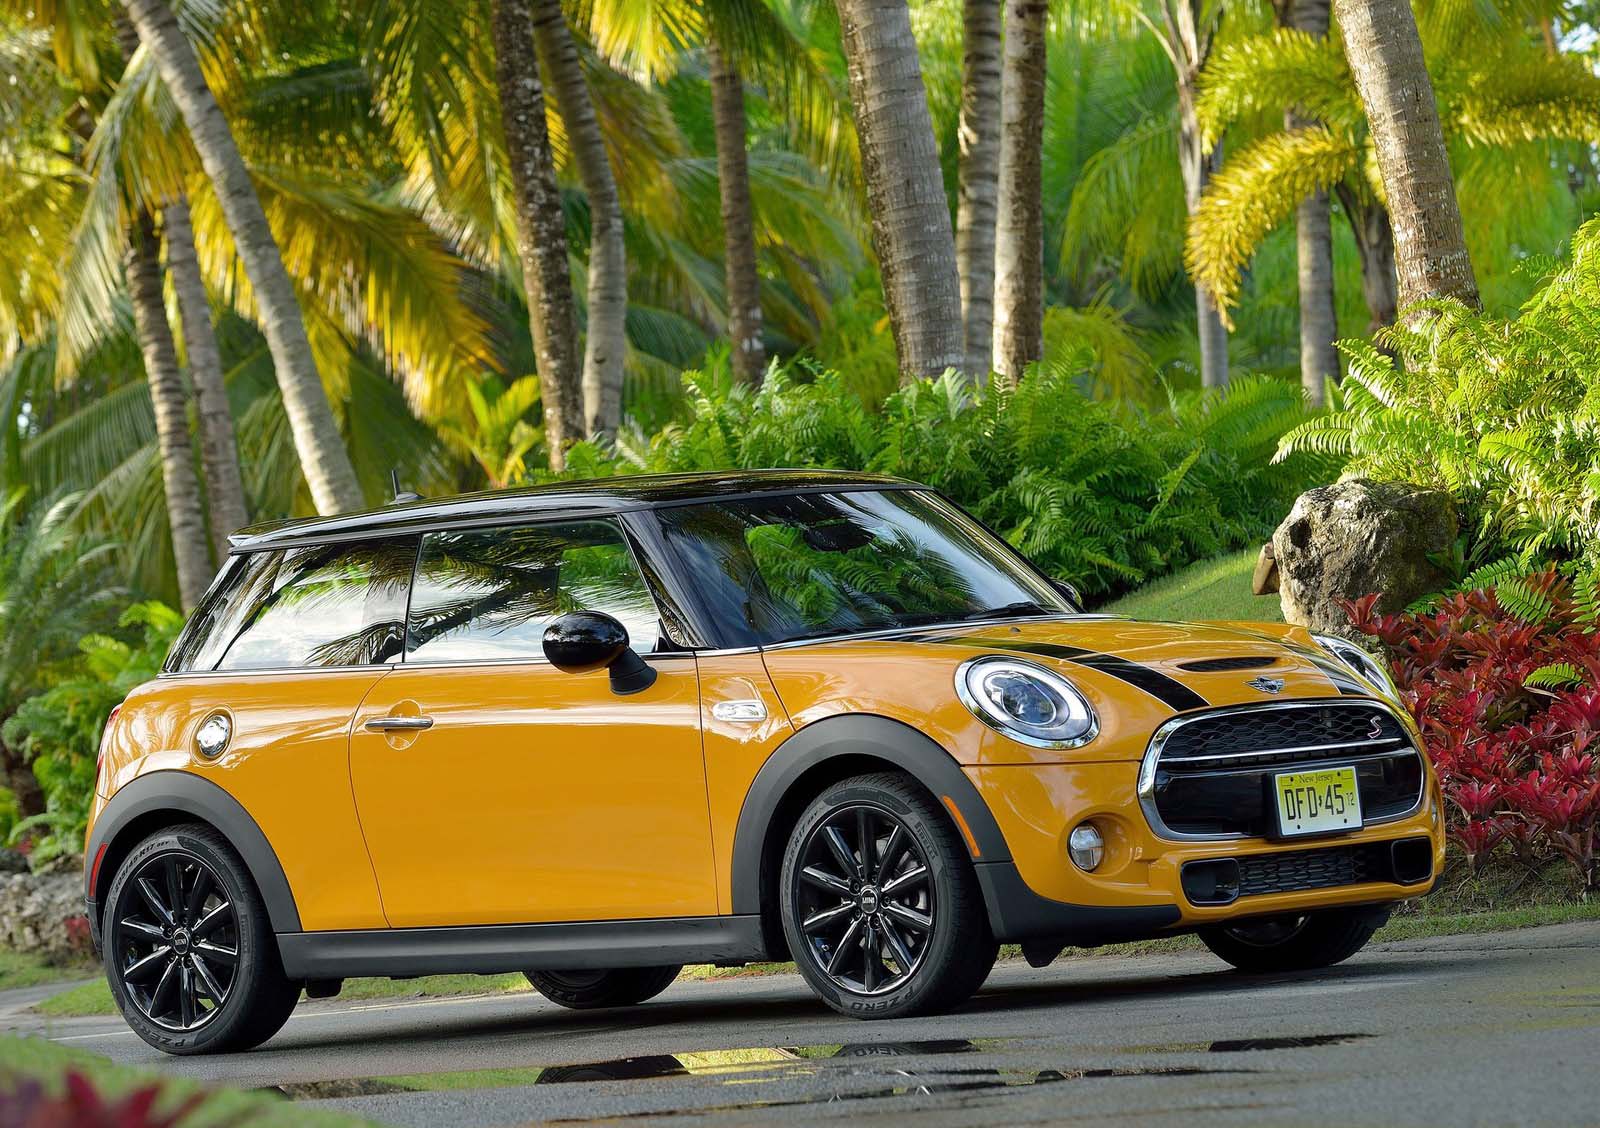 Growing popularity of used mini cooper cars in India